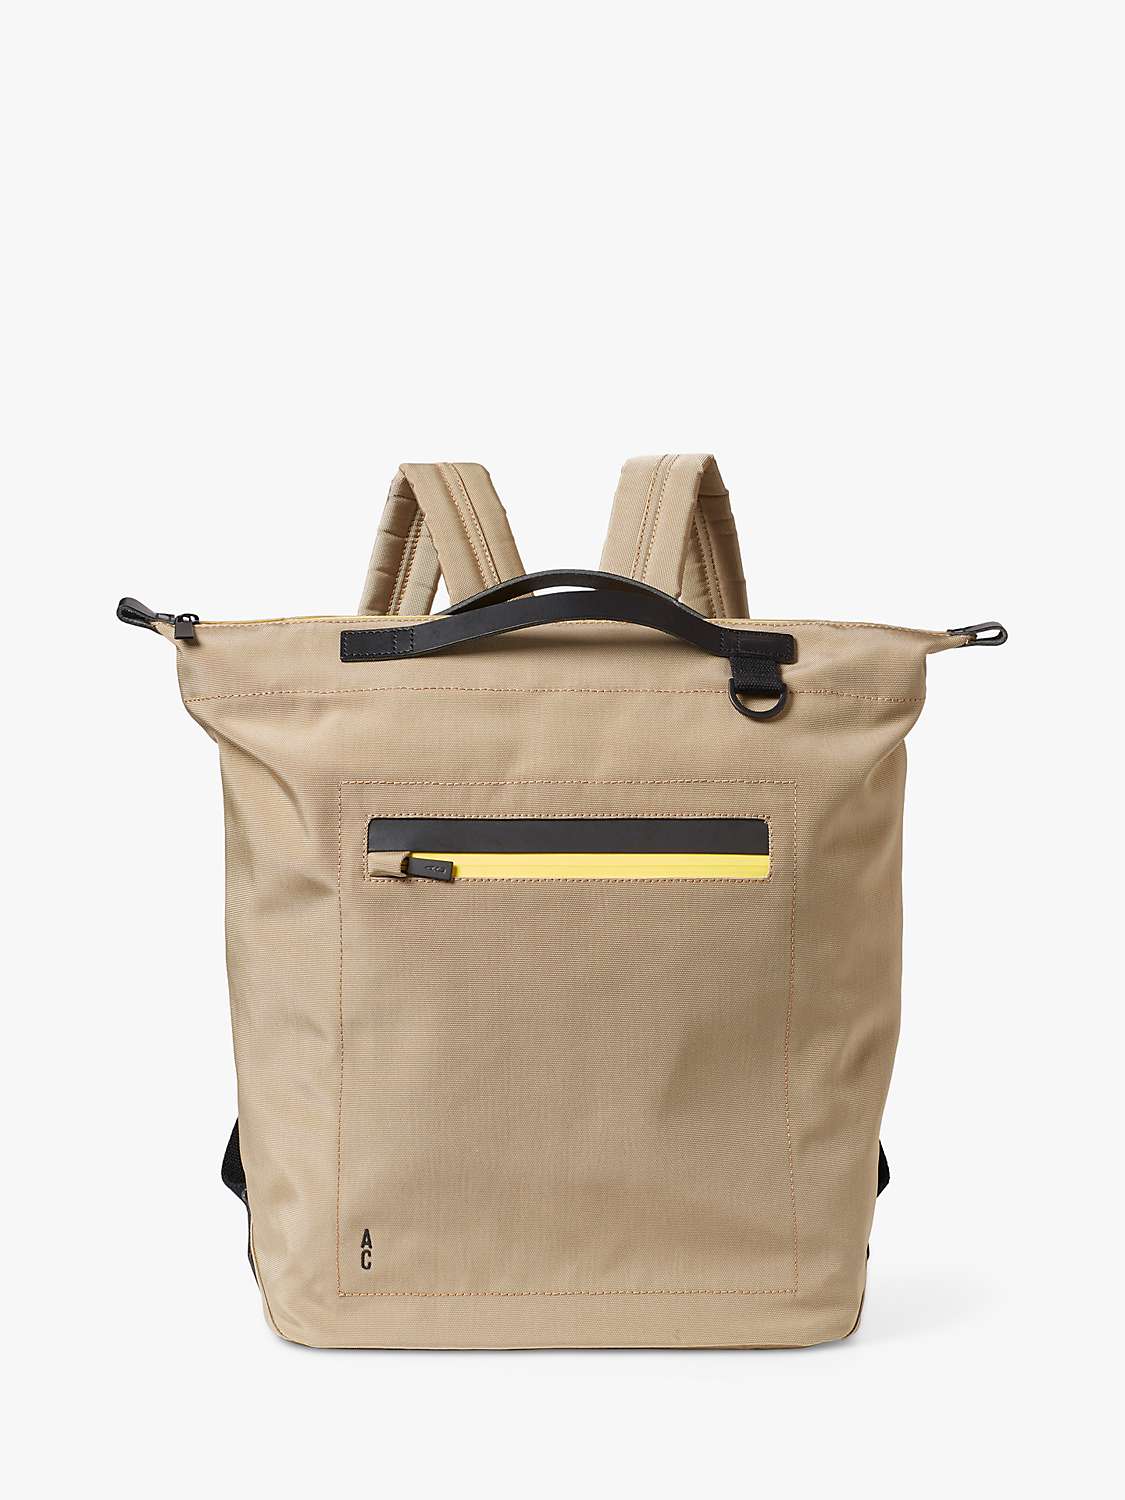 Ally Capellino Hoy Travel Cycle Recycled Rucksack, Sand at John Lewis ...